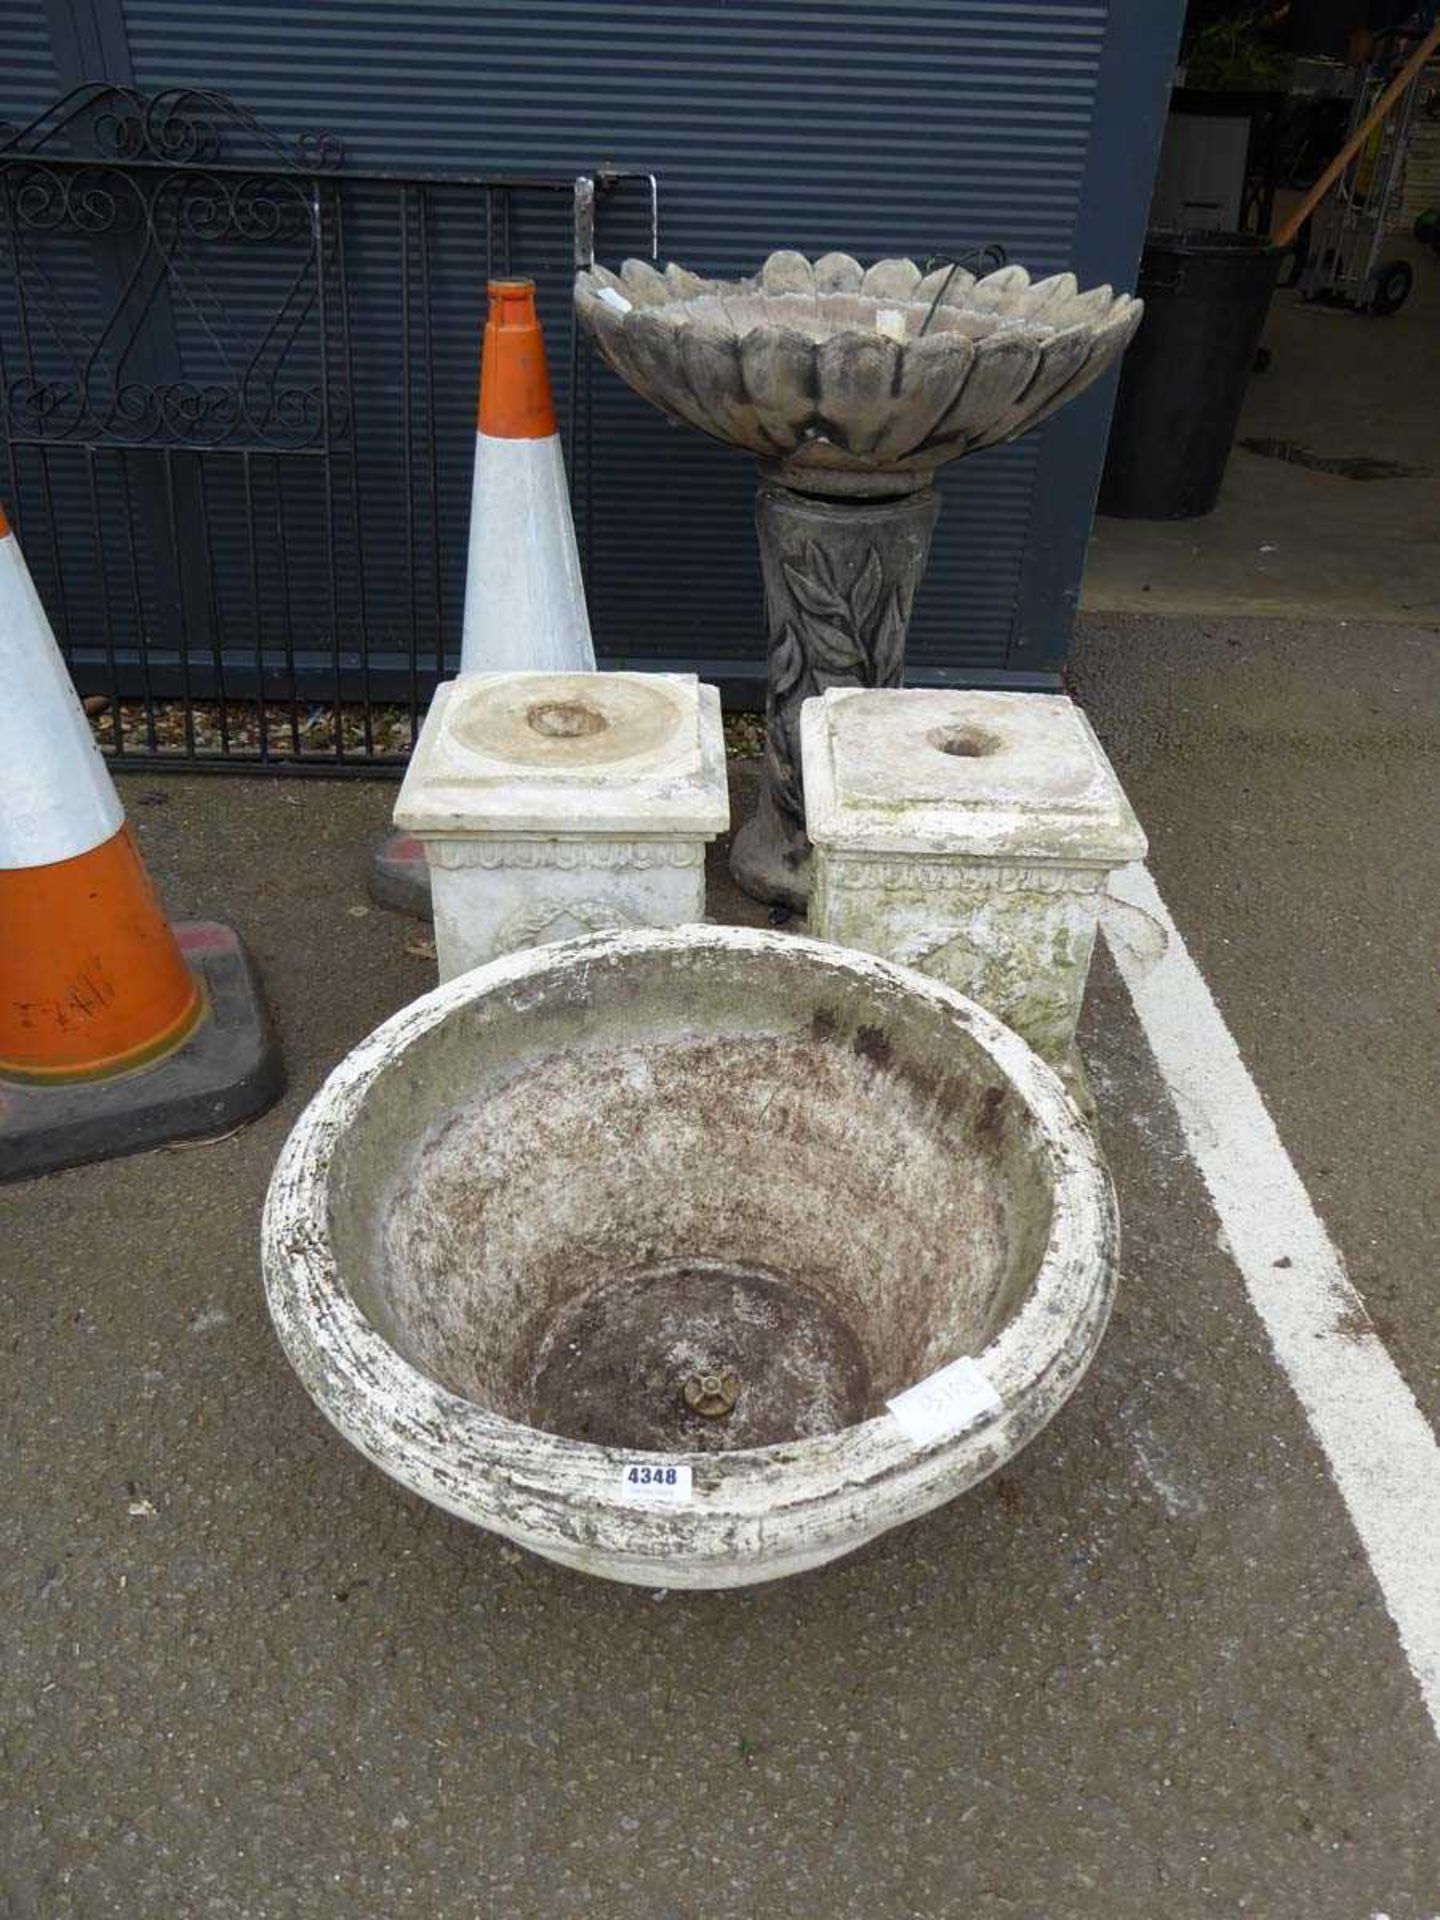 Round concrete pot and 2 plinths, with bird bath/water feature (top broken)